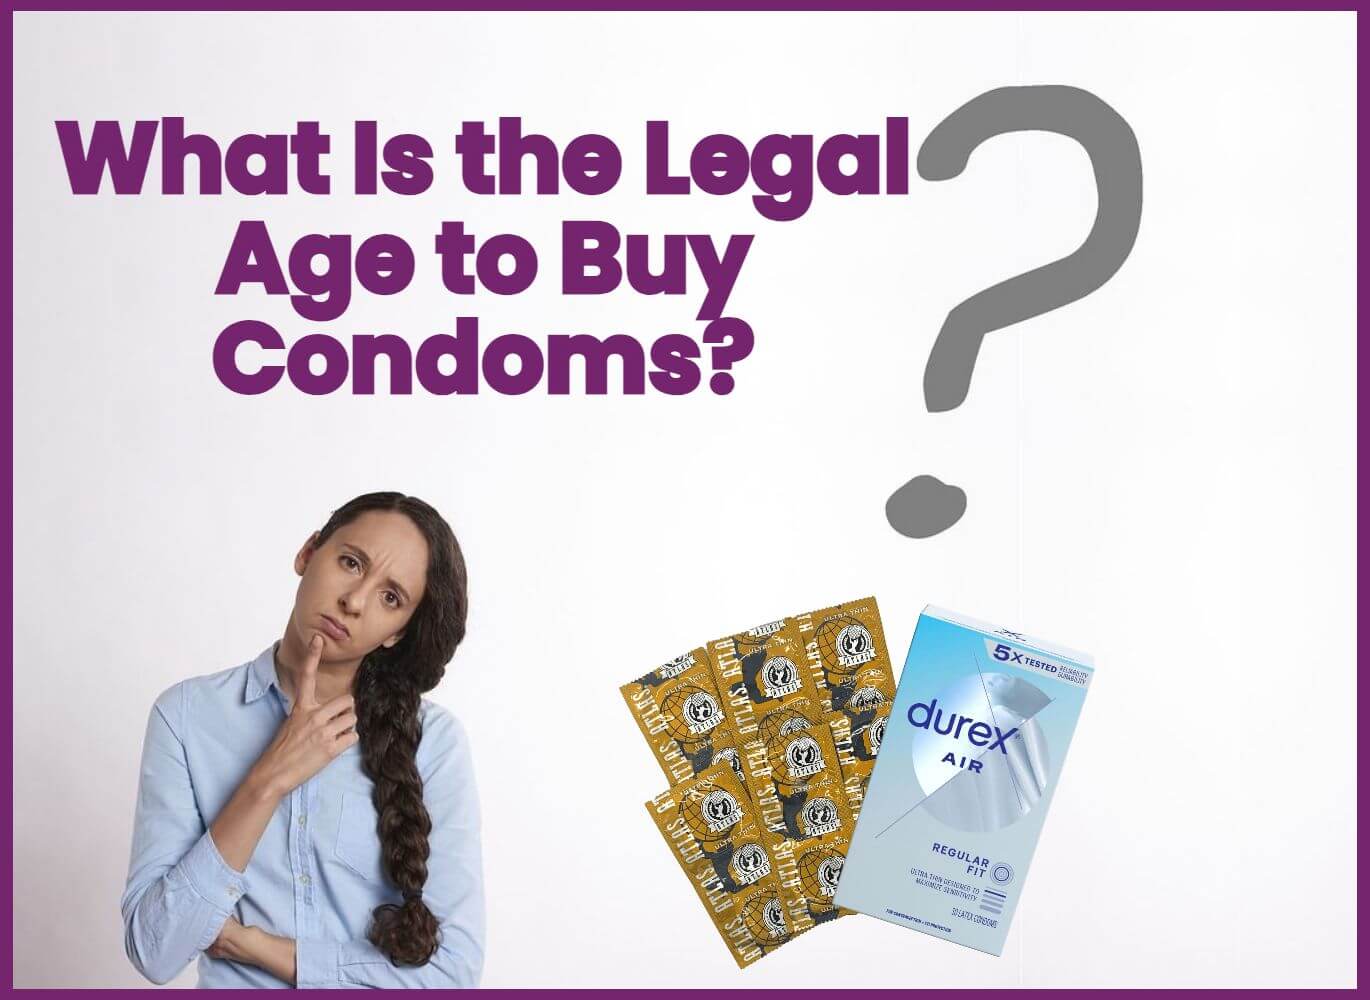 What Is the Legal Age to Buy Condoms?